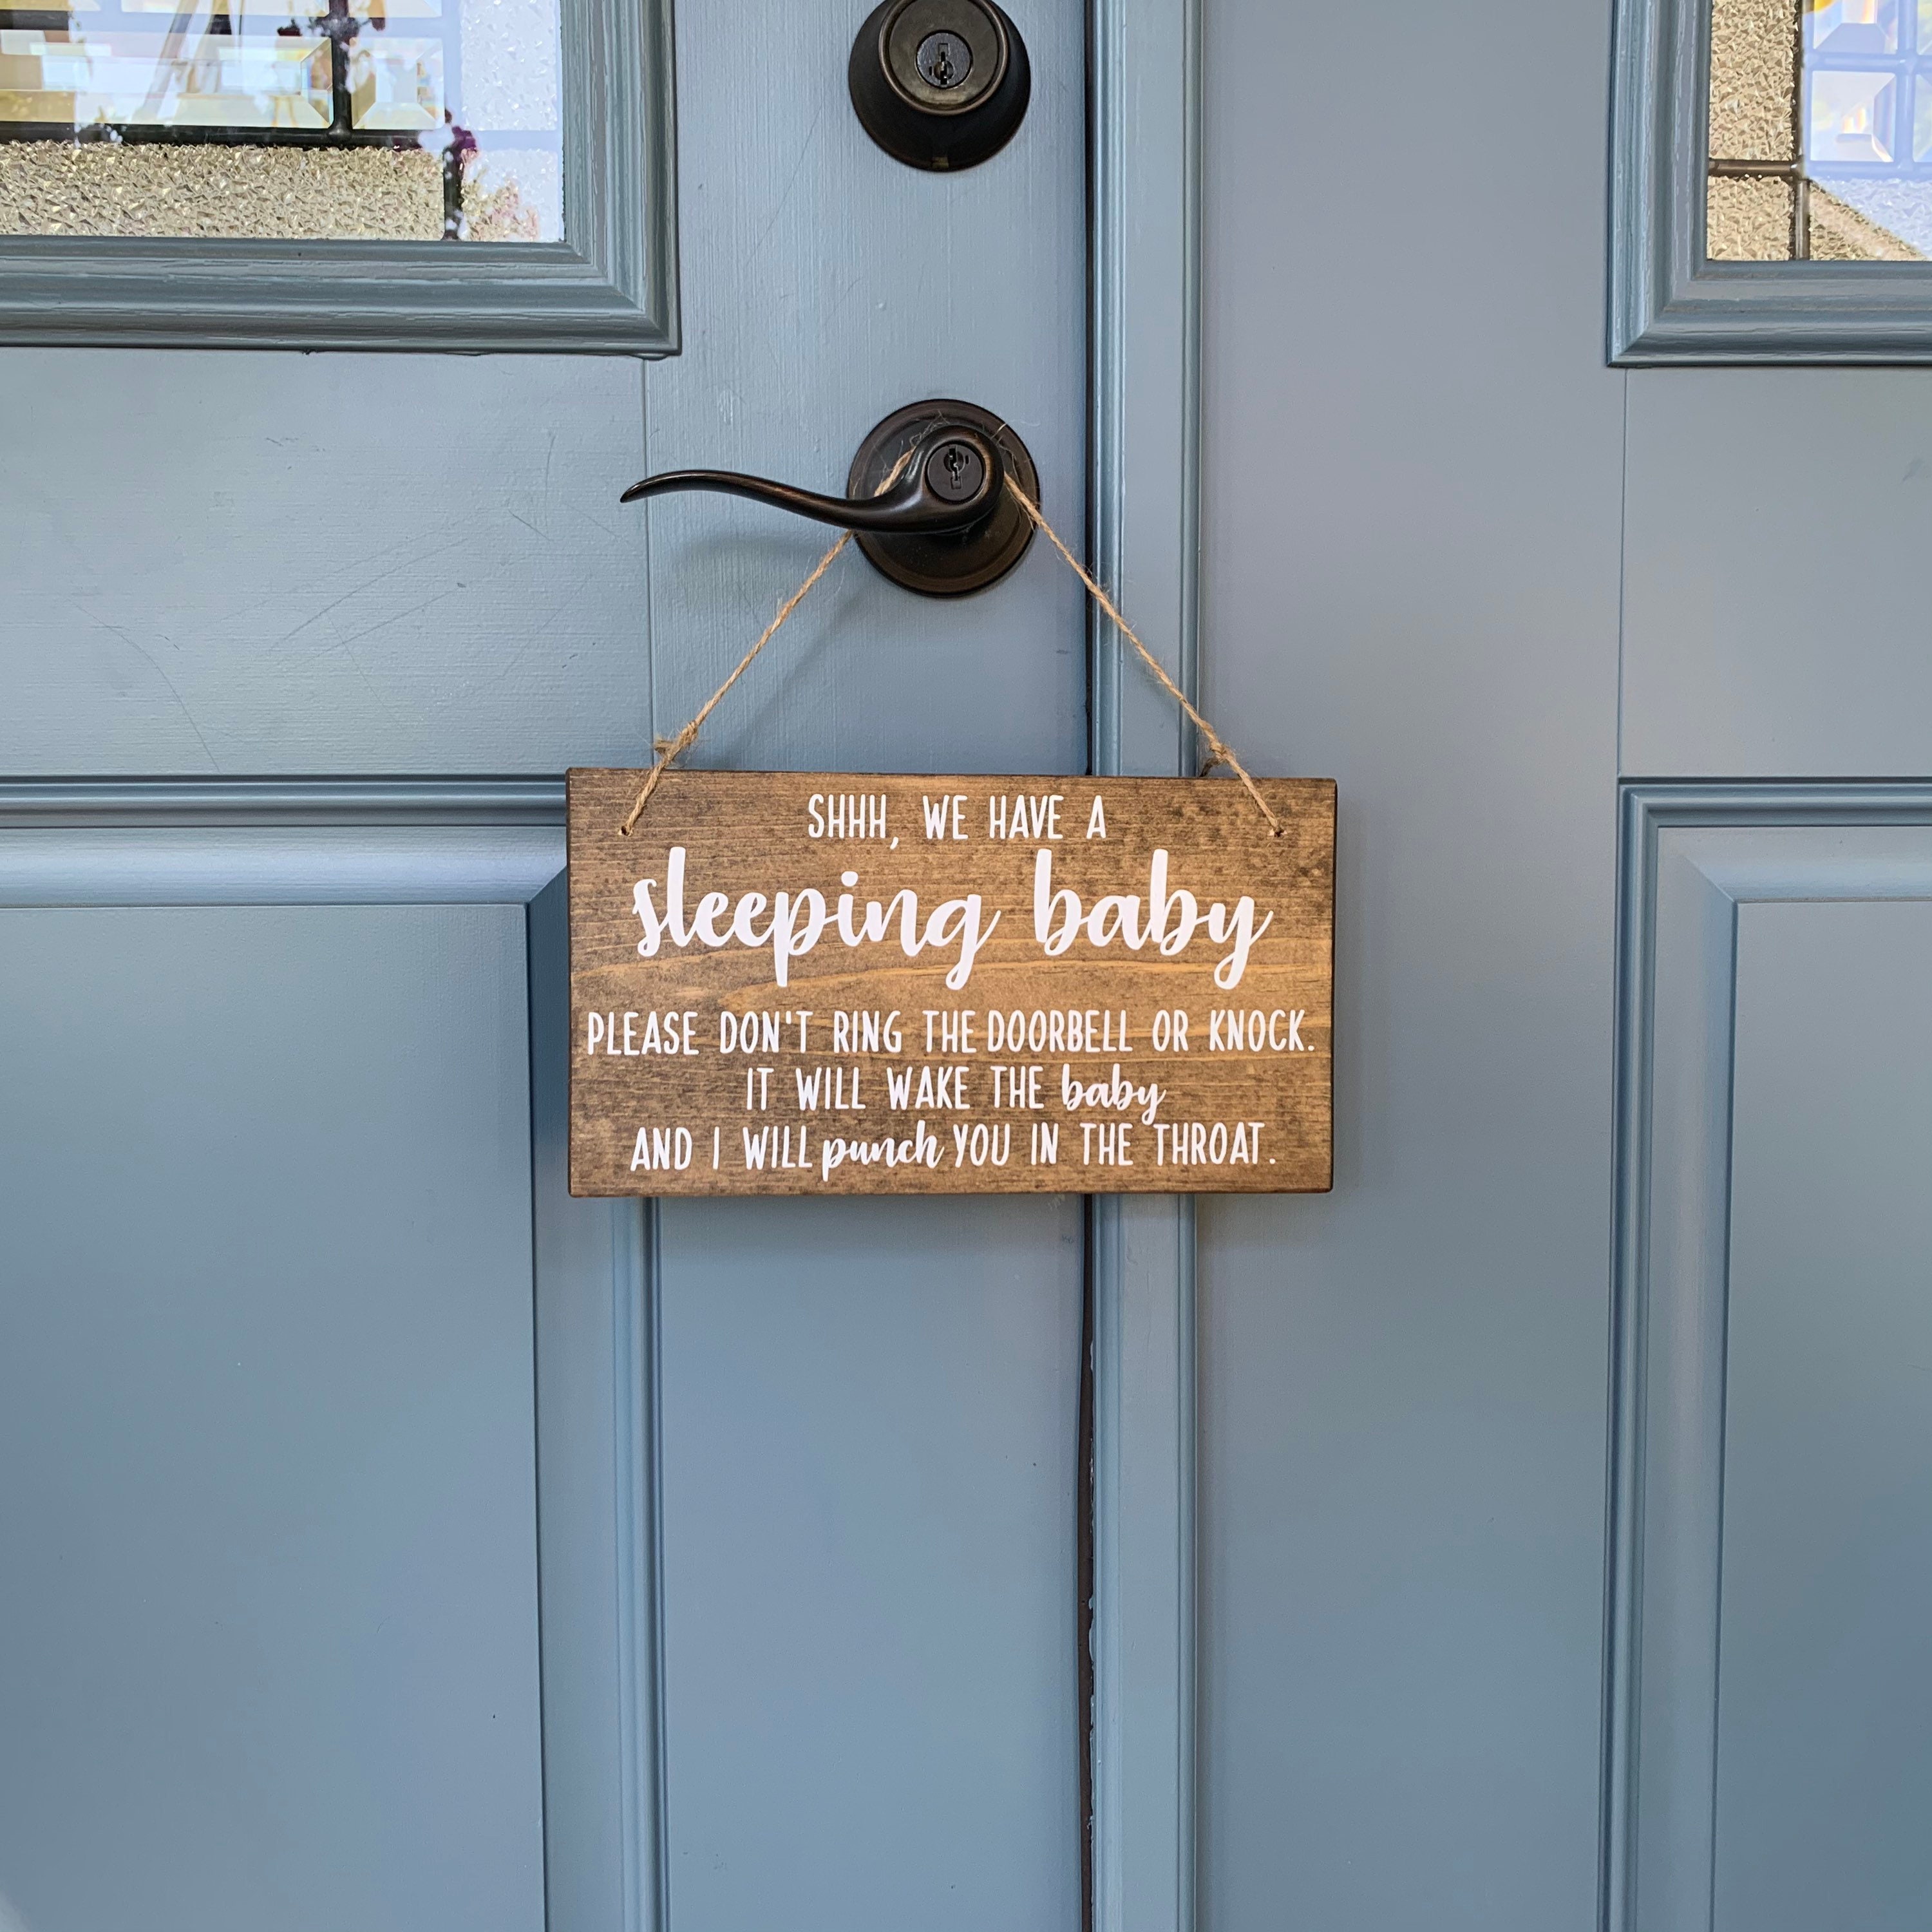 Baby Sleeping Sign for Front Door Dont Ring Doorbell Sign Baby Sleeping Please Do Not Ring or Knock 5 inch by 10 inch Hanging Wall Sign Baby Sleeping Sign 